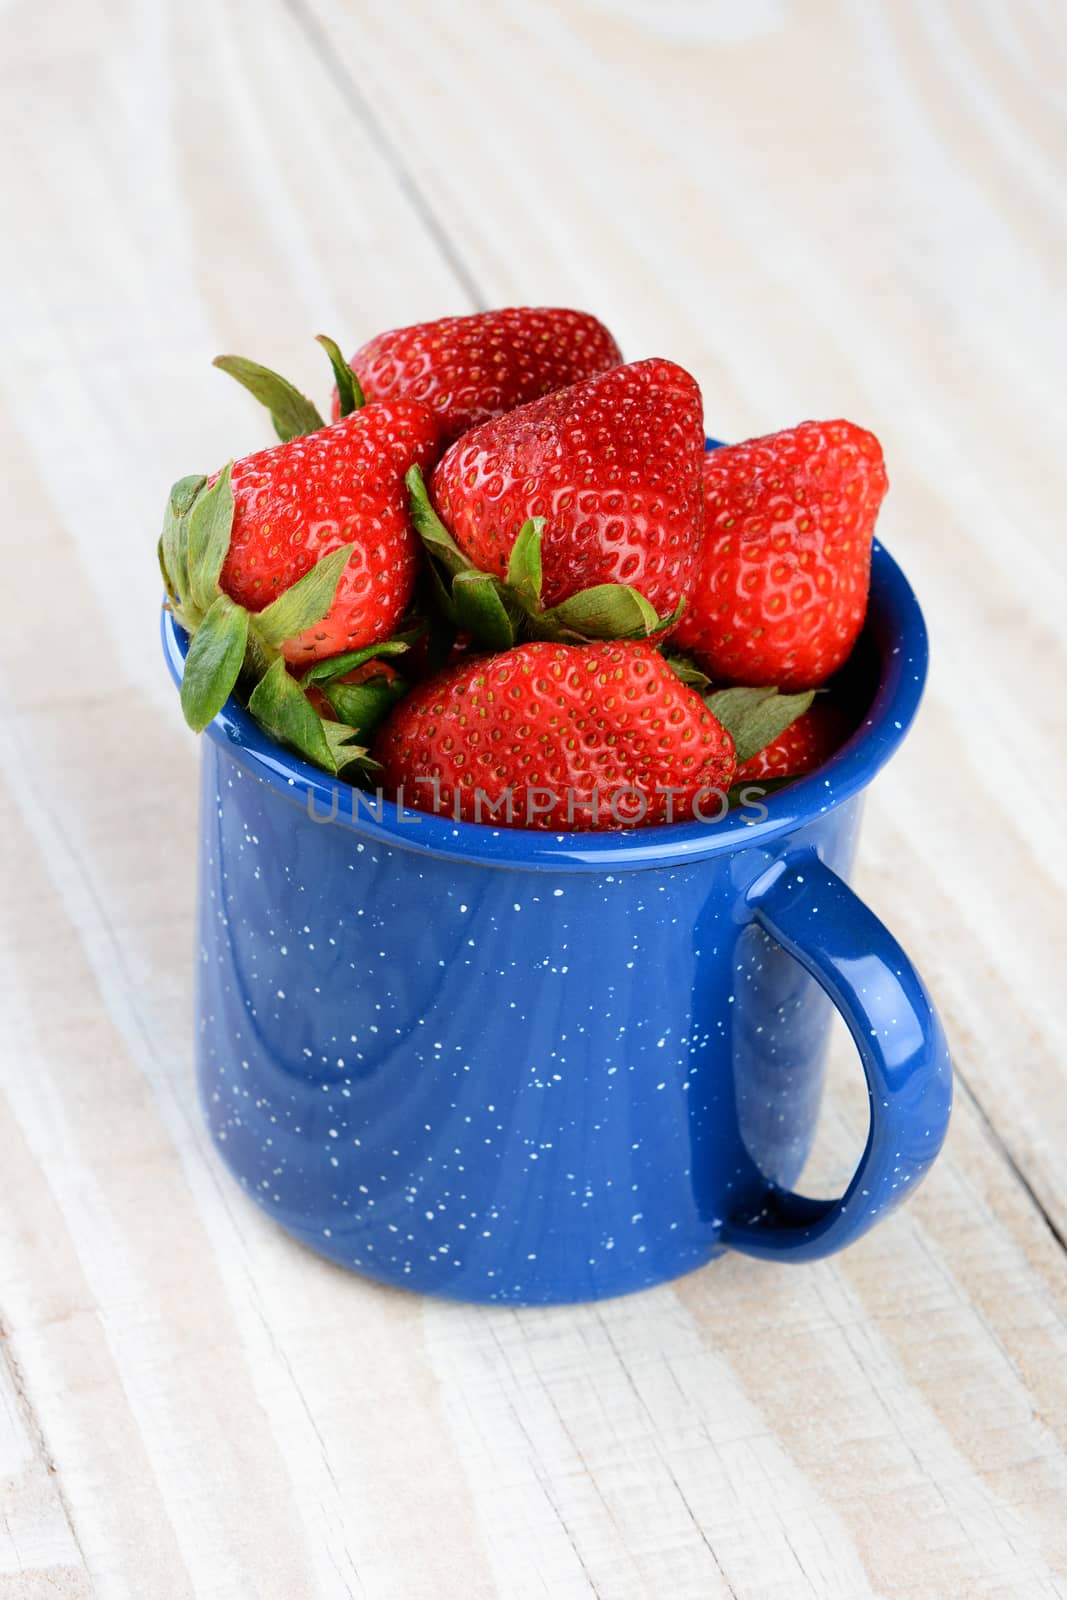 A blue speckled cup on a rustic farmhouse style kitchen table filled with freshly picked ripe strawberries. Vertical format.